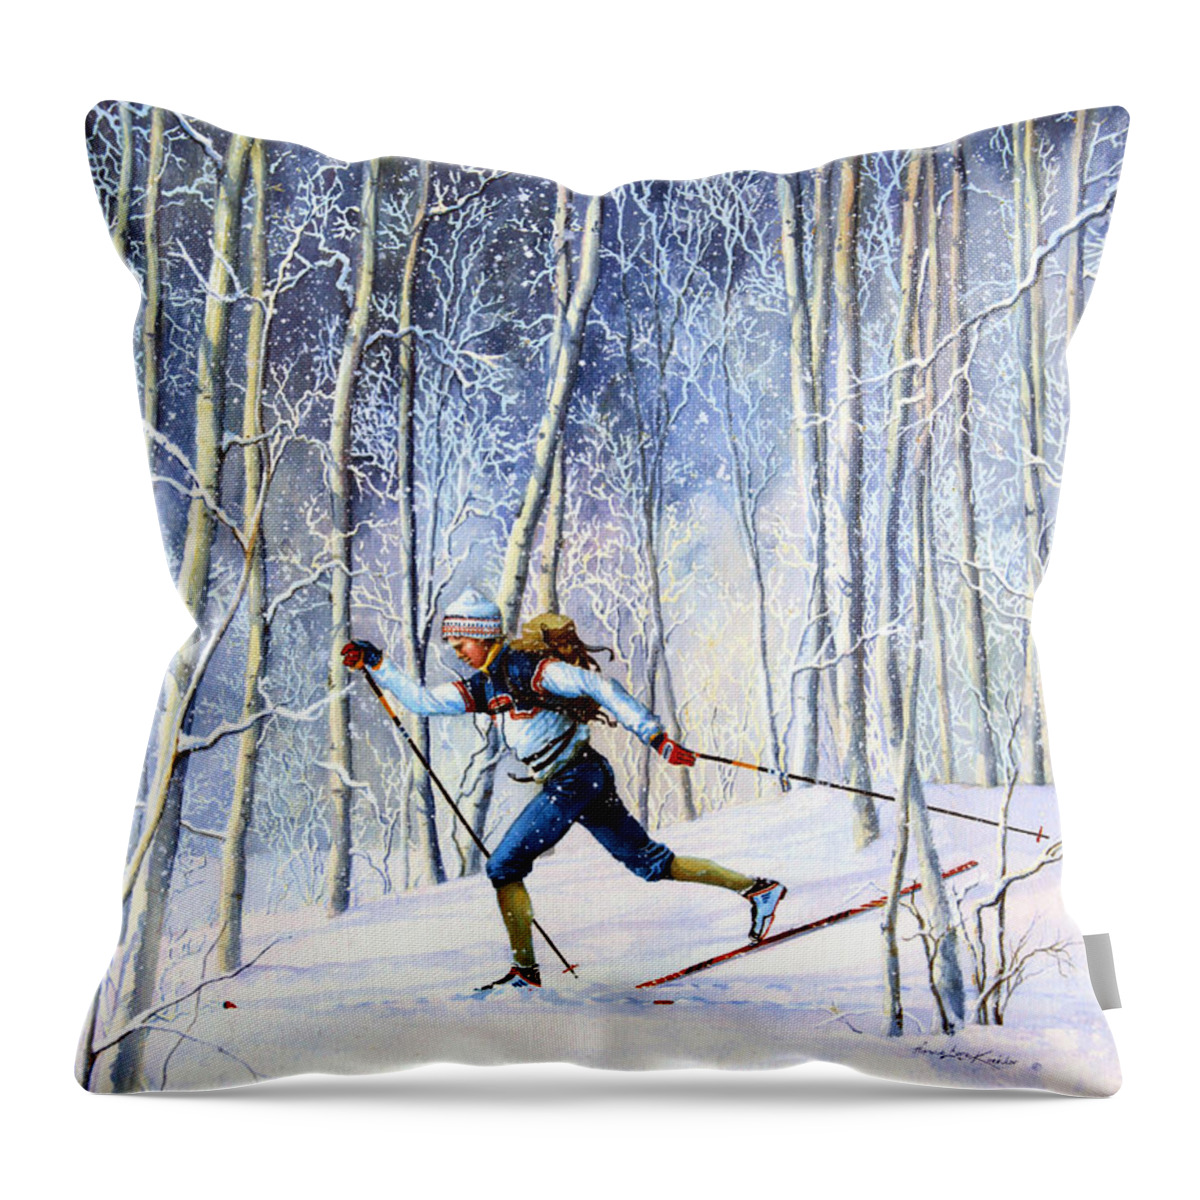 Sports Artist Throw Pillow featuring the painting Whispering Tracks by Hanne Lore Koehler